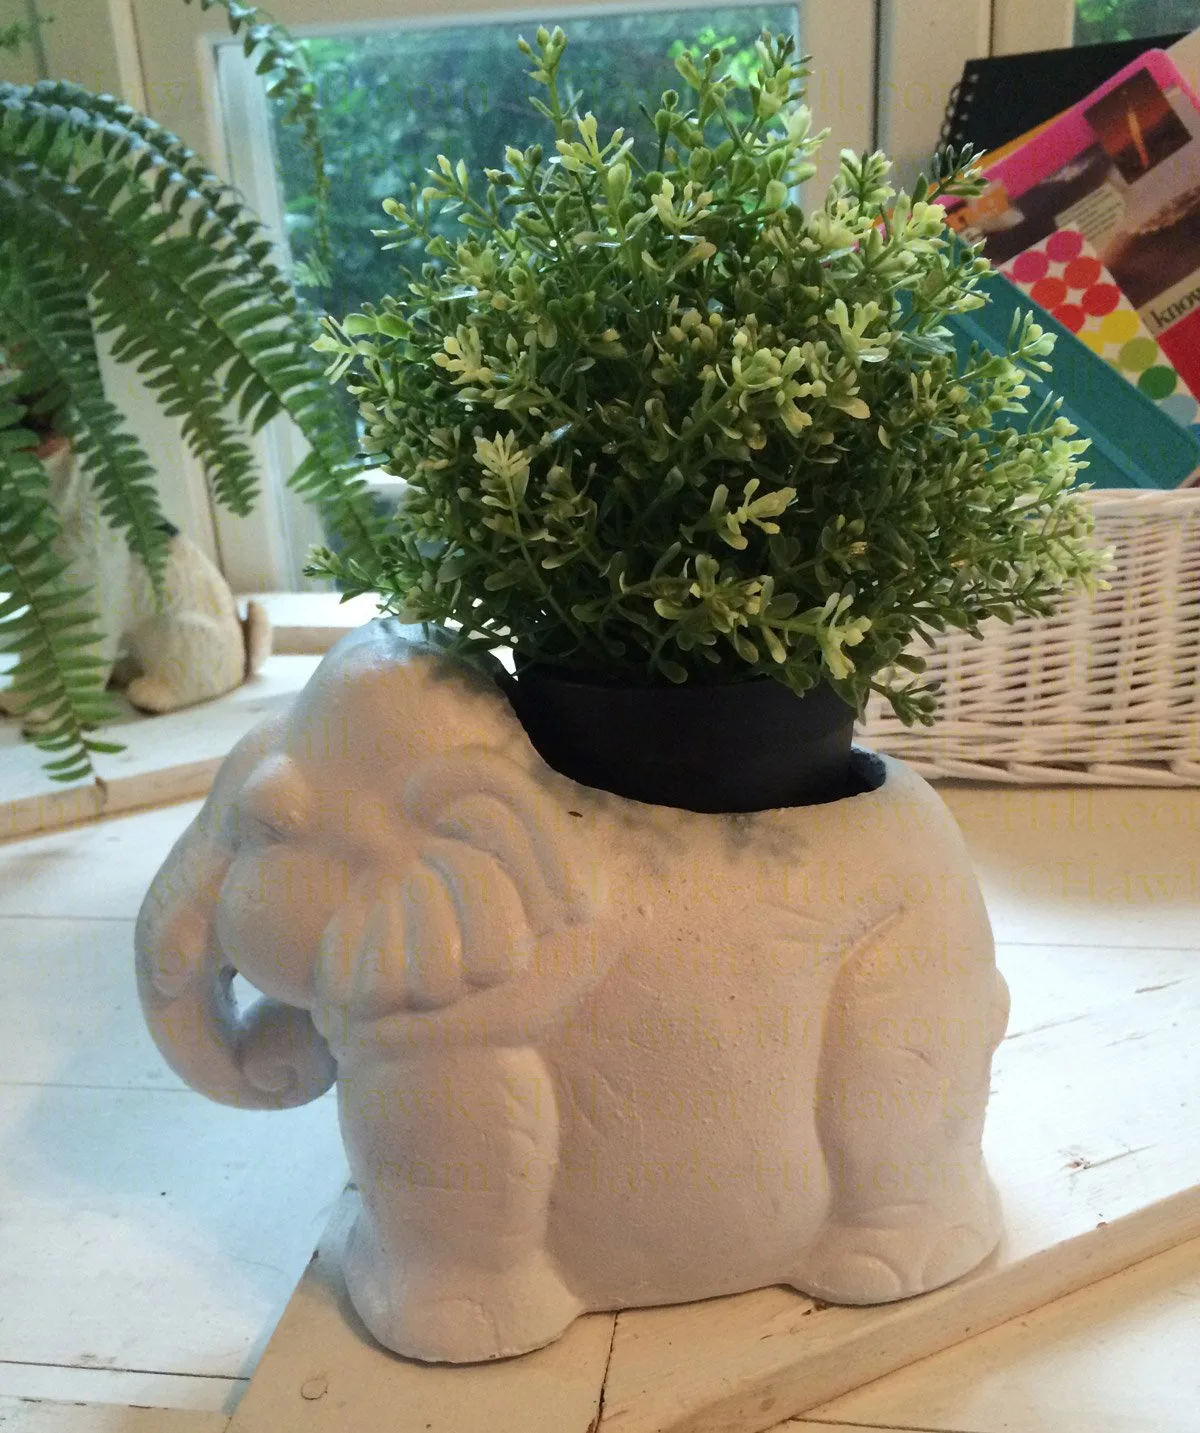 hacking Ikea's potted herb plants